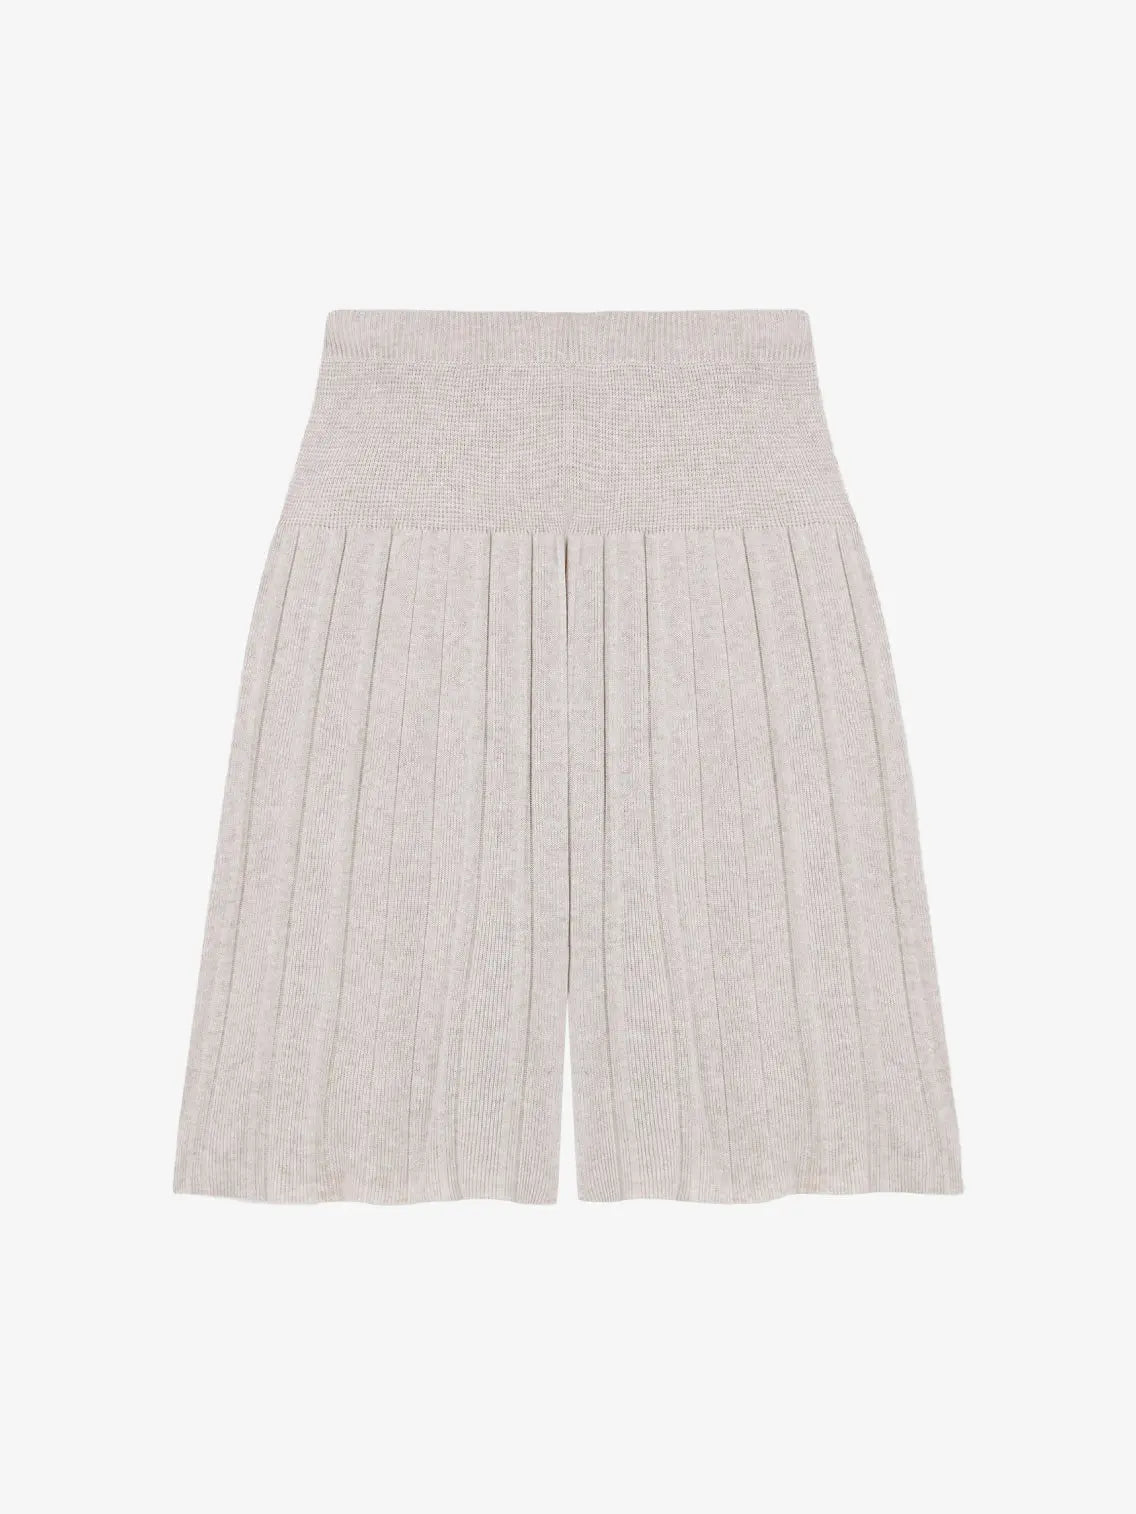 A pair of Viscose Pleated Bermuda Grey by Cordera featuring a wide elastic waistband and pleated detailing. The shorts have a knee-length cut and a soft texture, suitable for casual or comfortable wear. Find these stylish shorts at Bassalstore in Barcelona.